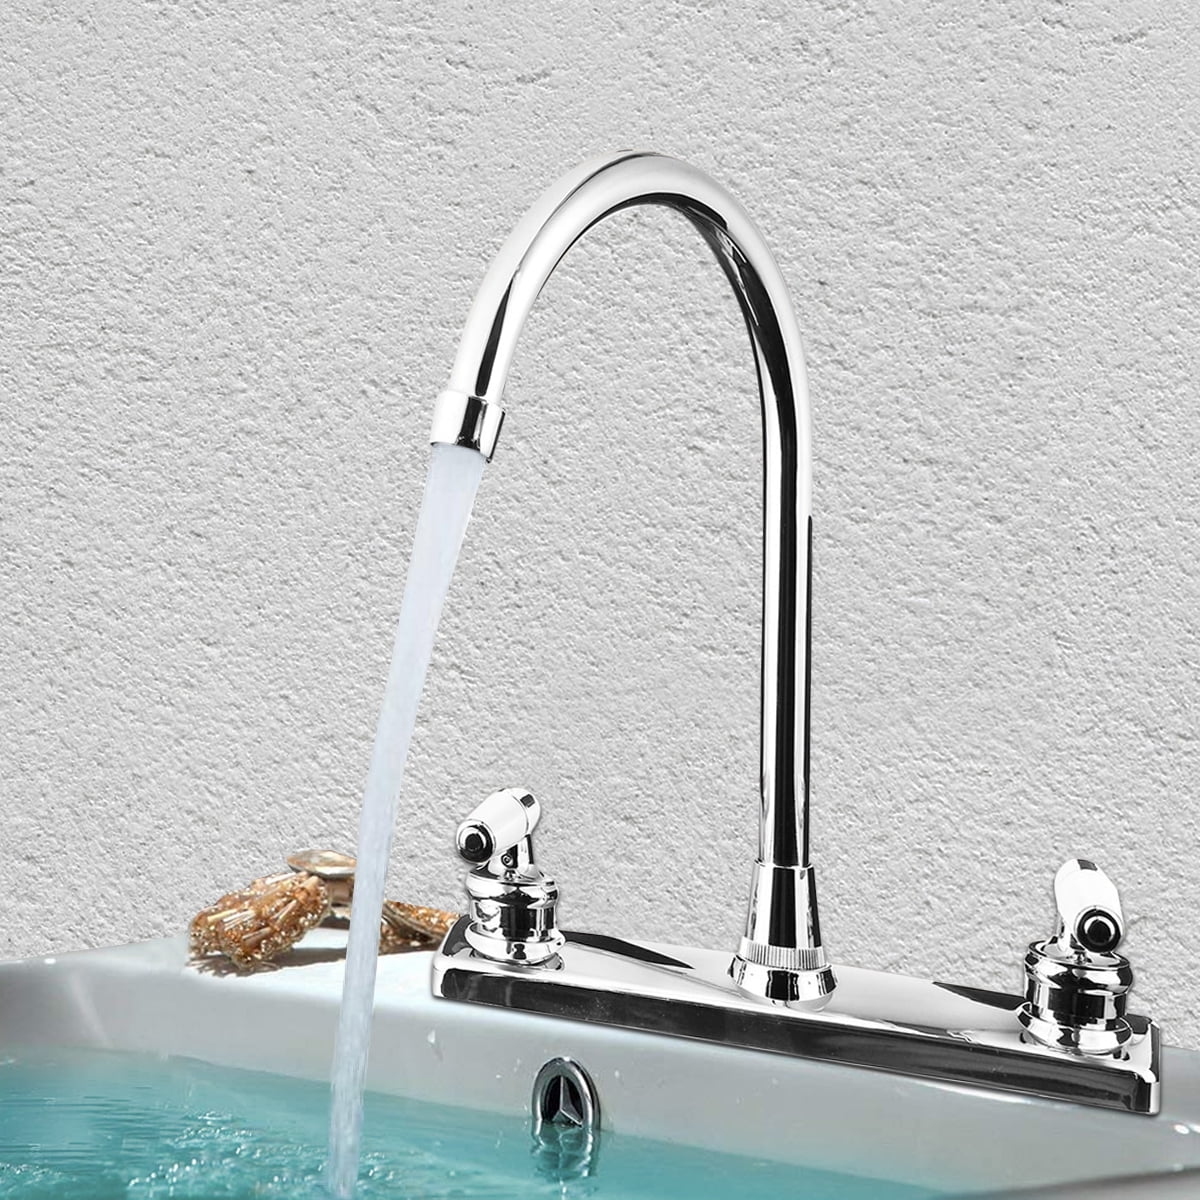 Double Handles RV Mobile Home Kitchen Sink Faucet Stainless Steel US 